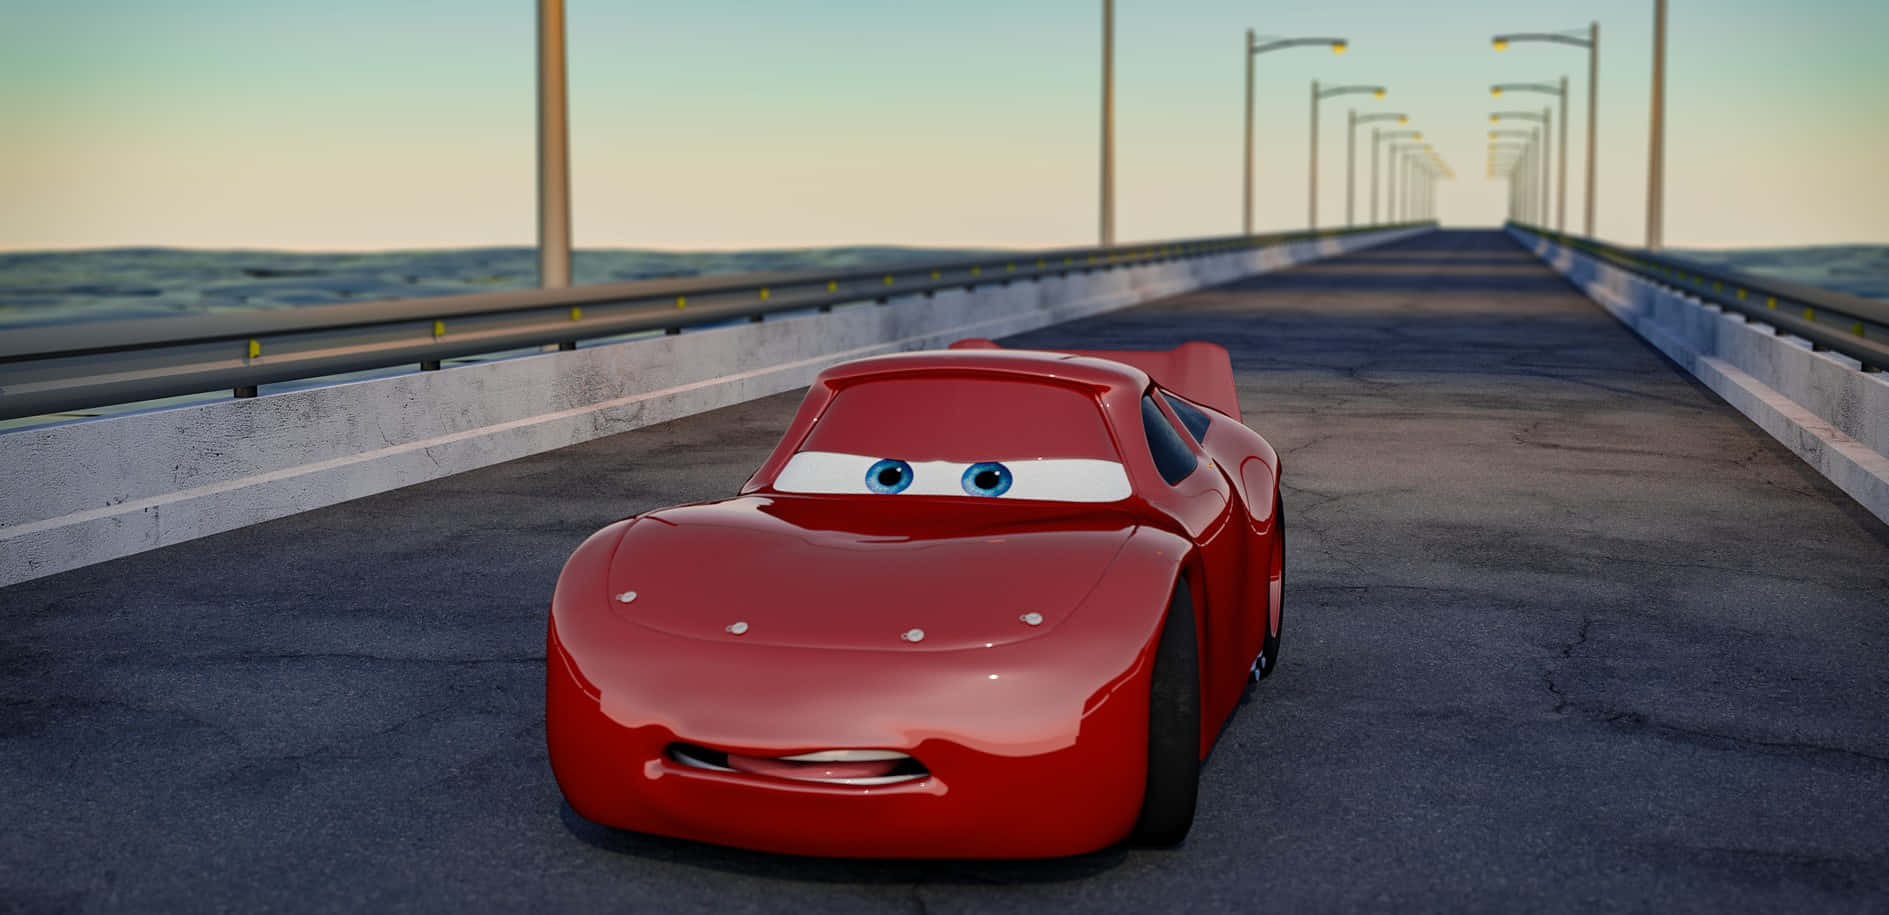 Lightning McQueen racing on the track